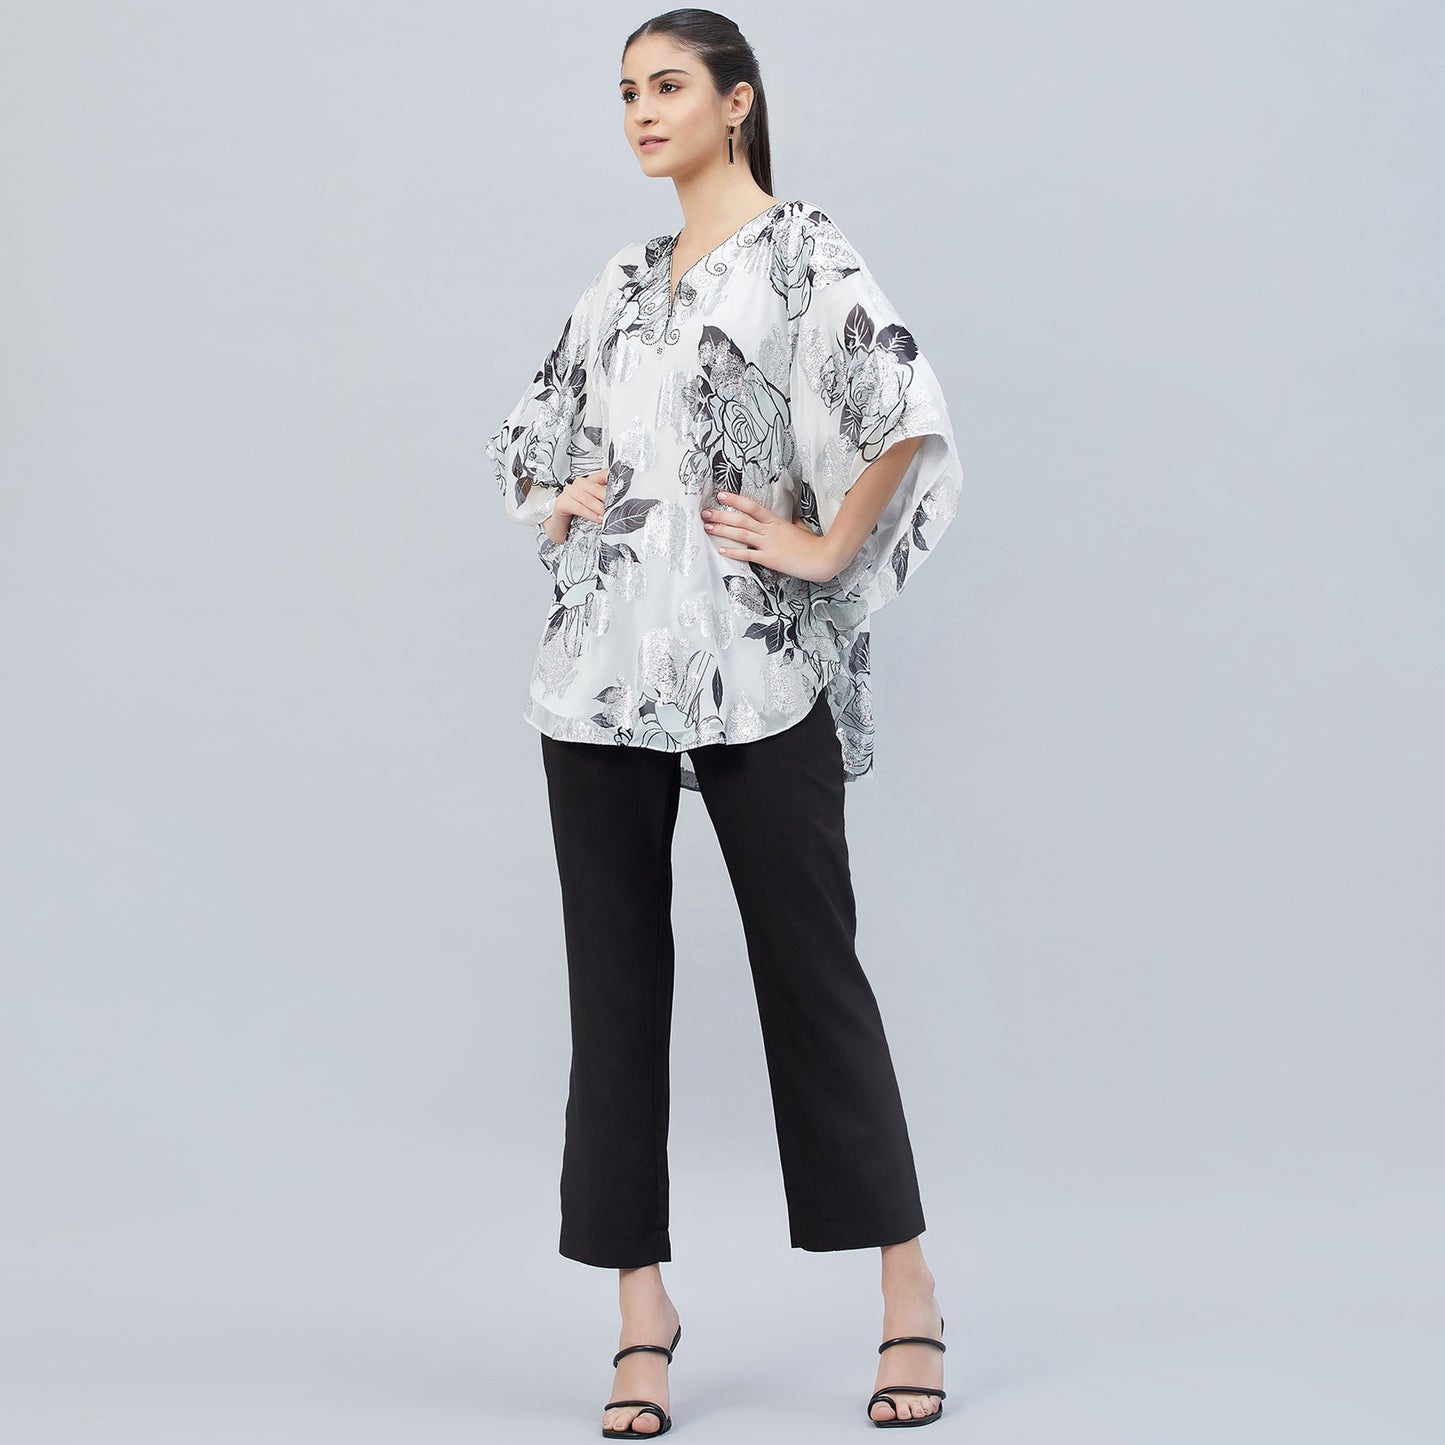 Black and White Floral Lurex Tunic